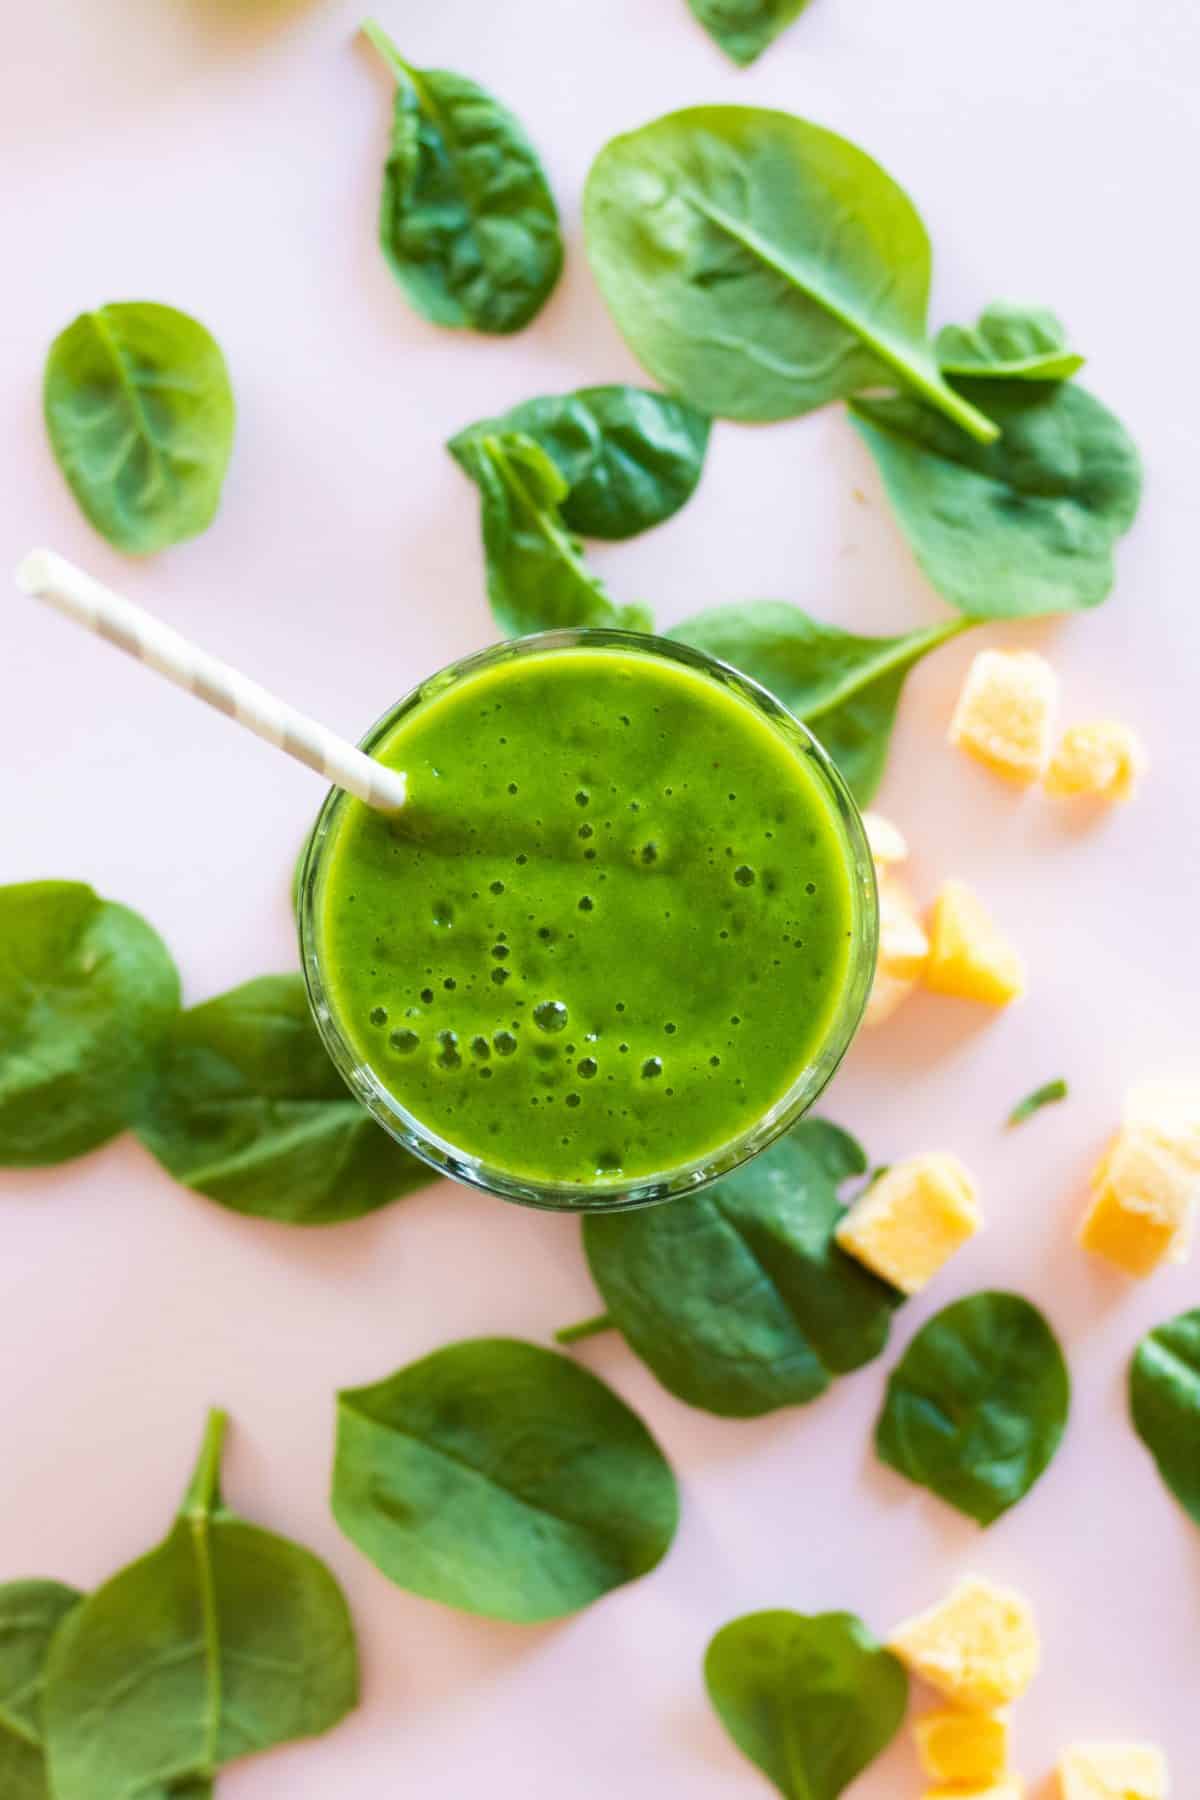 top view of green smoothie in a glass with a straw with mango pieces and spinach leaves around